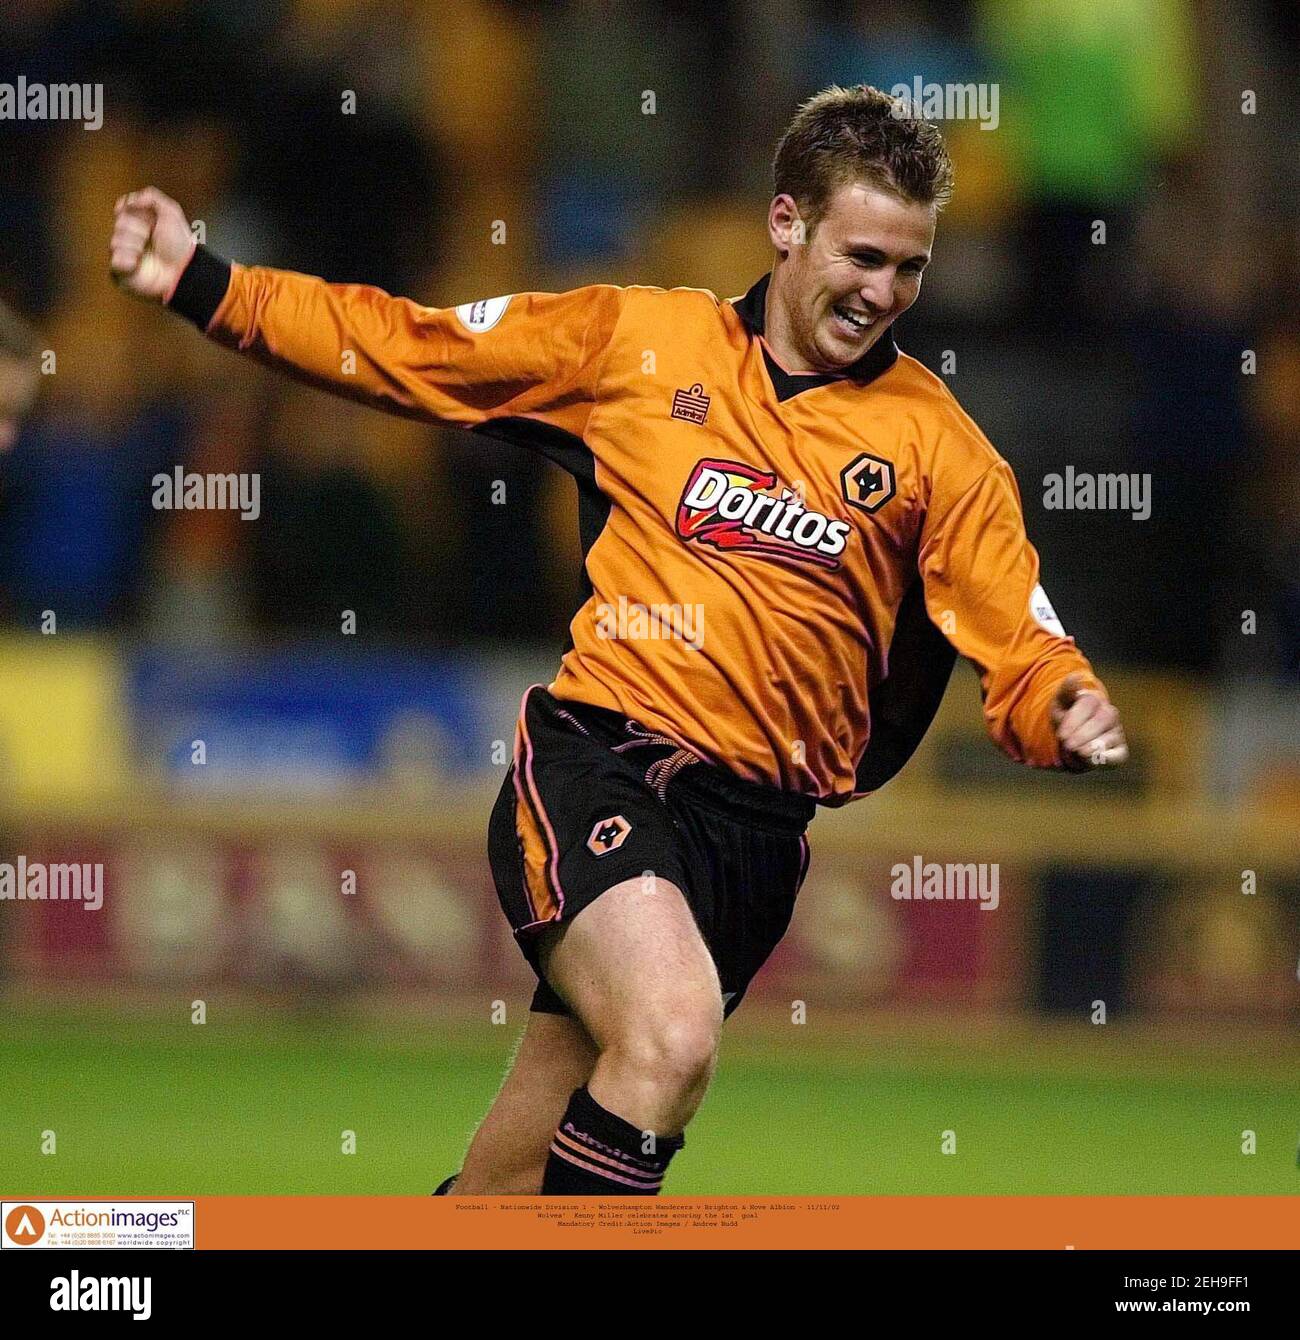 Football - Nationwide Division 1 - Wolverhampton Wanderers v Brighton & Hove Albion - 11/11/02  Wolves'  Kenny Miller celebrates scoring the 1st  goal  Mandatory Credit:Action Images / Andrew Budd  LivePic Stock Photo